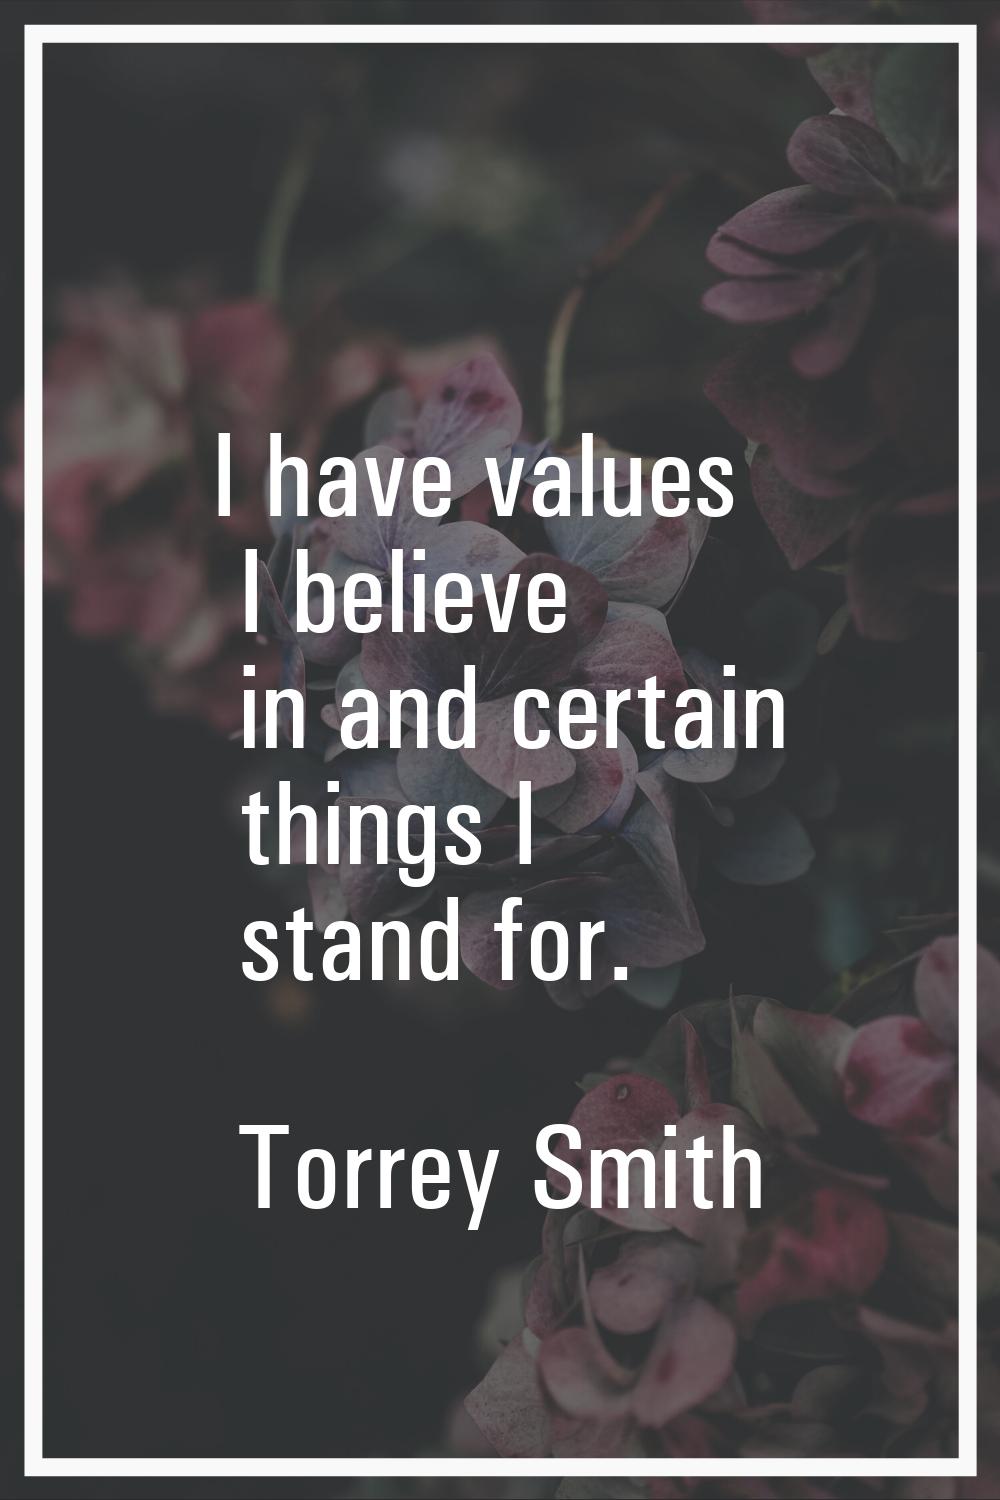 I have values I believe in and certain things I stand for.